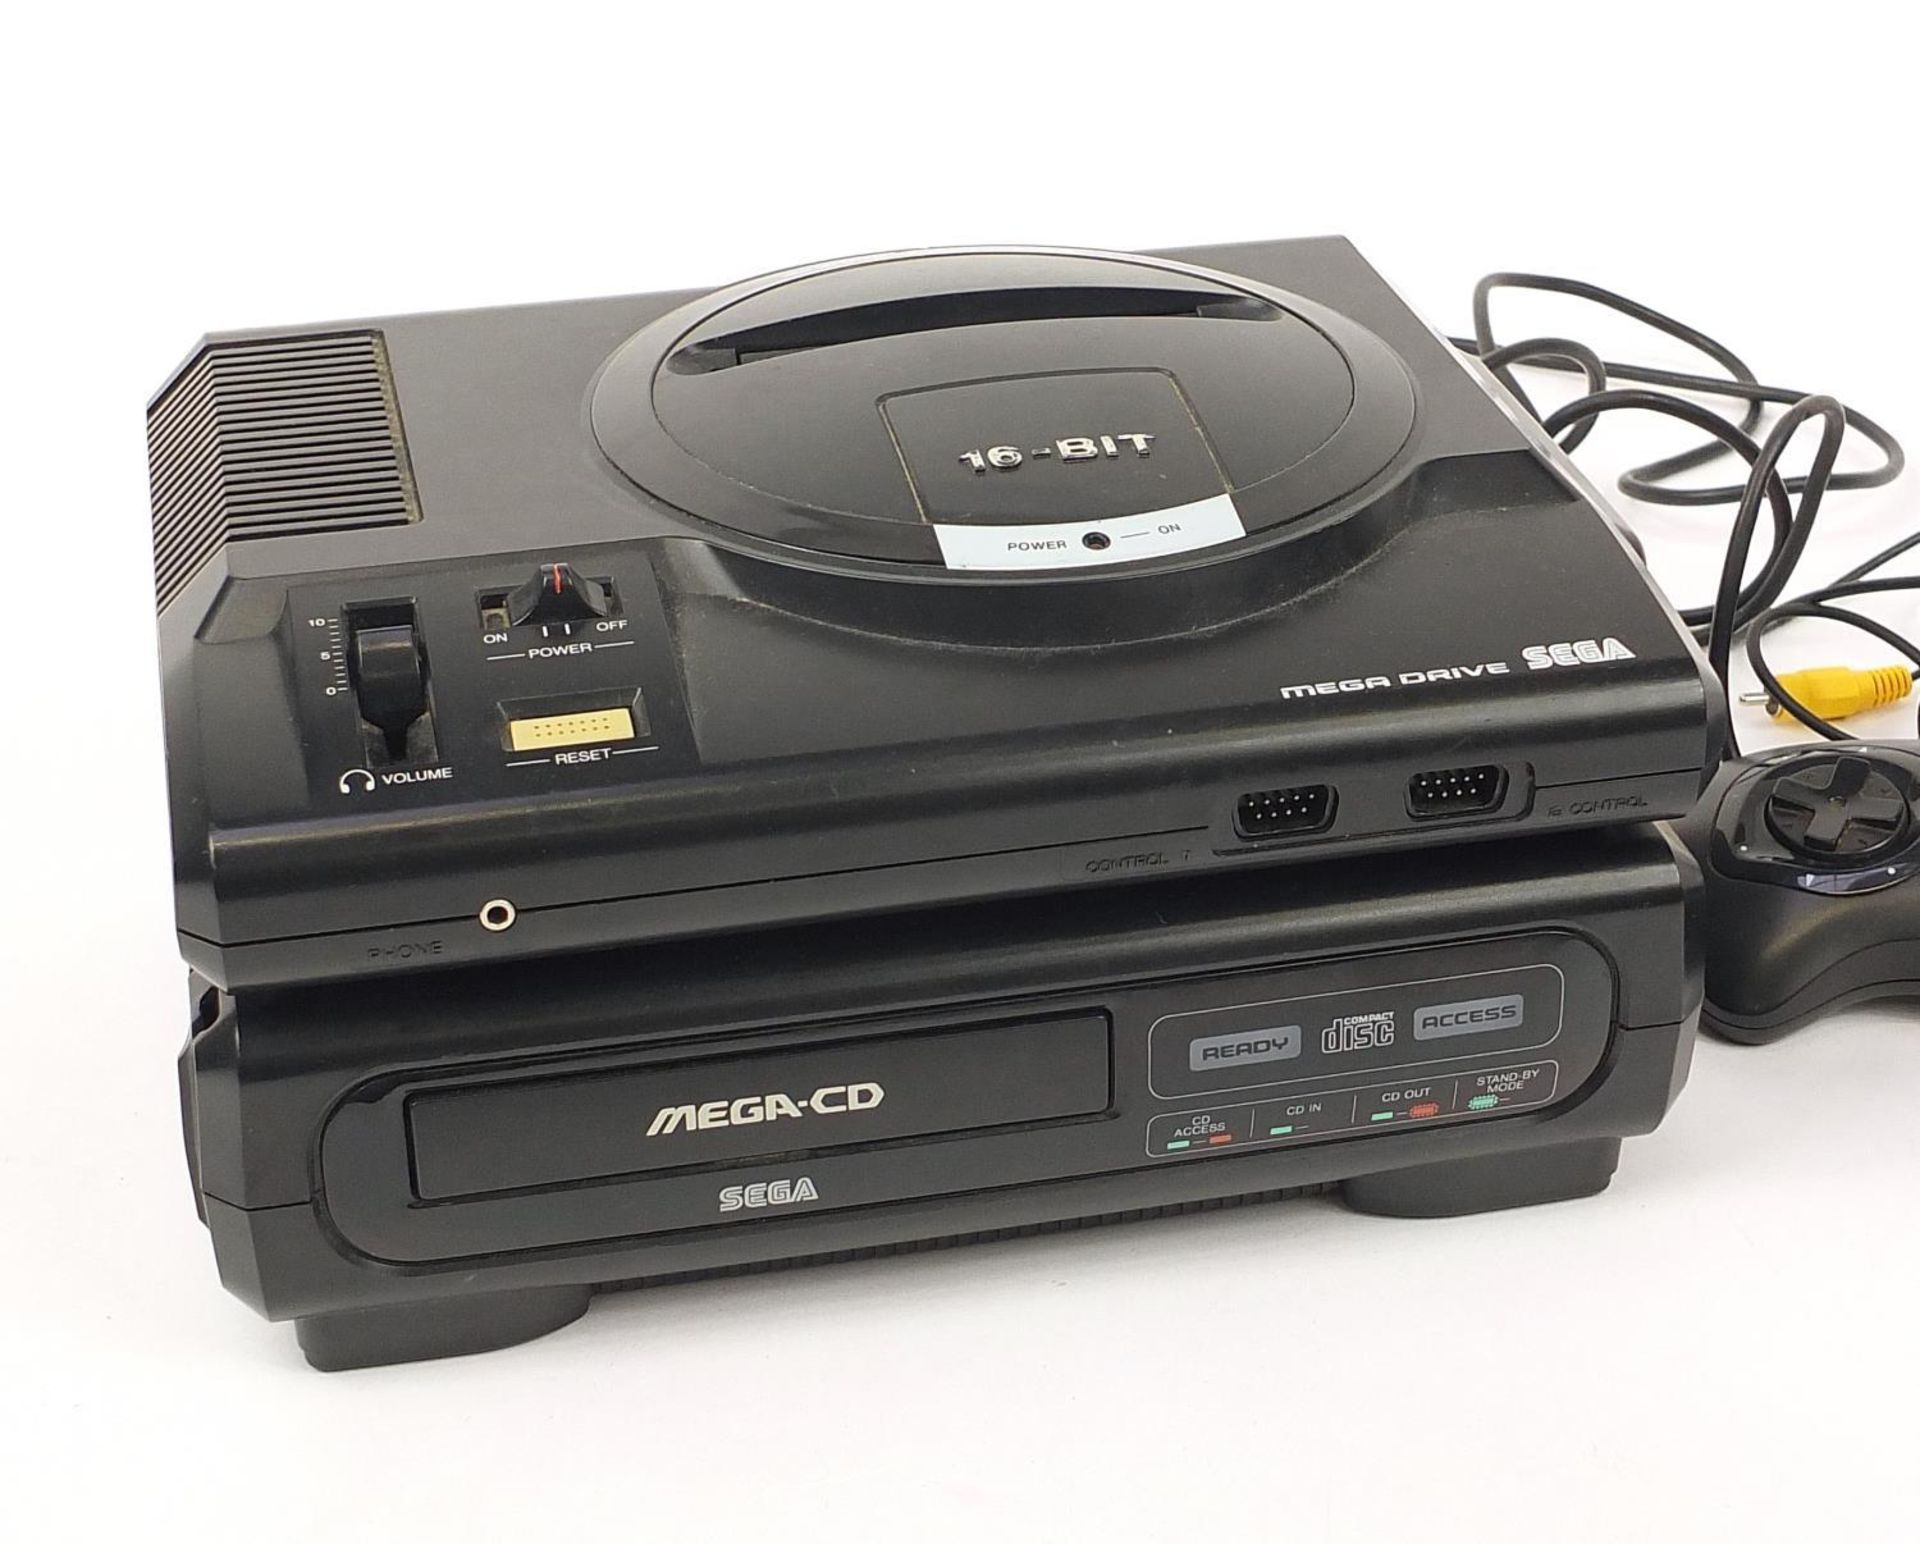 Sega Mega Drive games console with Mega-CD converter and controllers : - Image 2 of 4